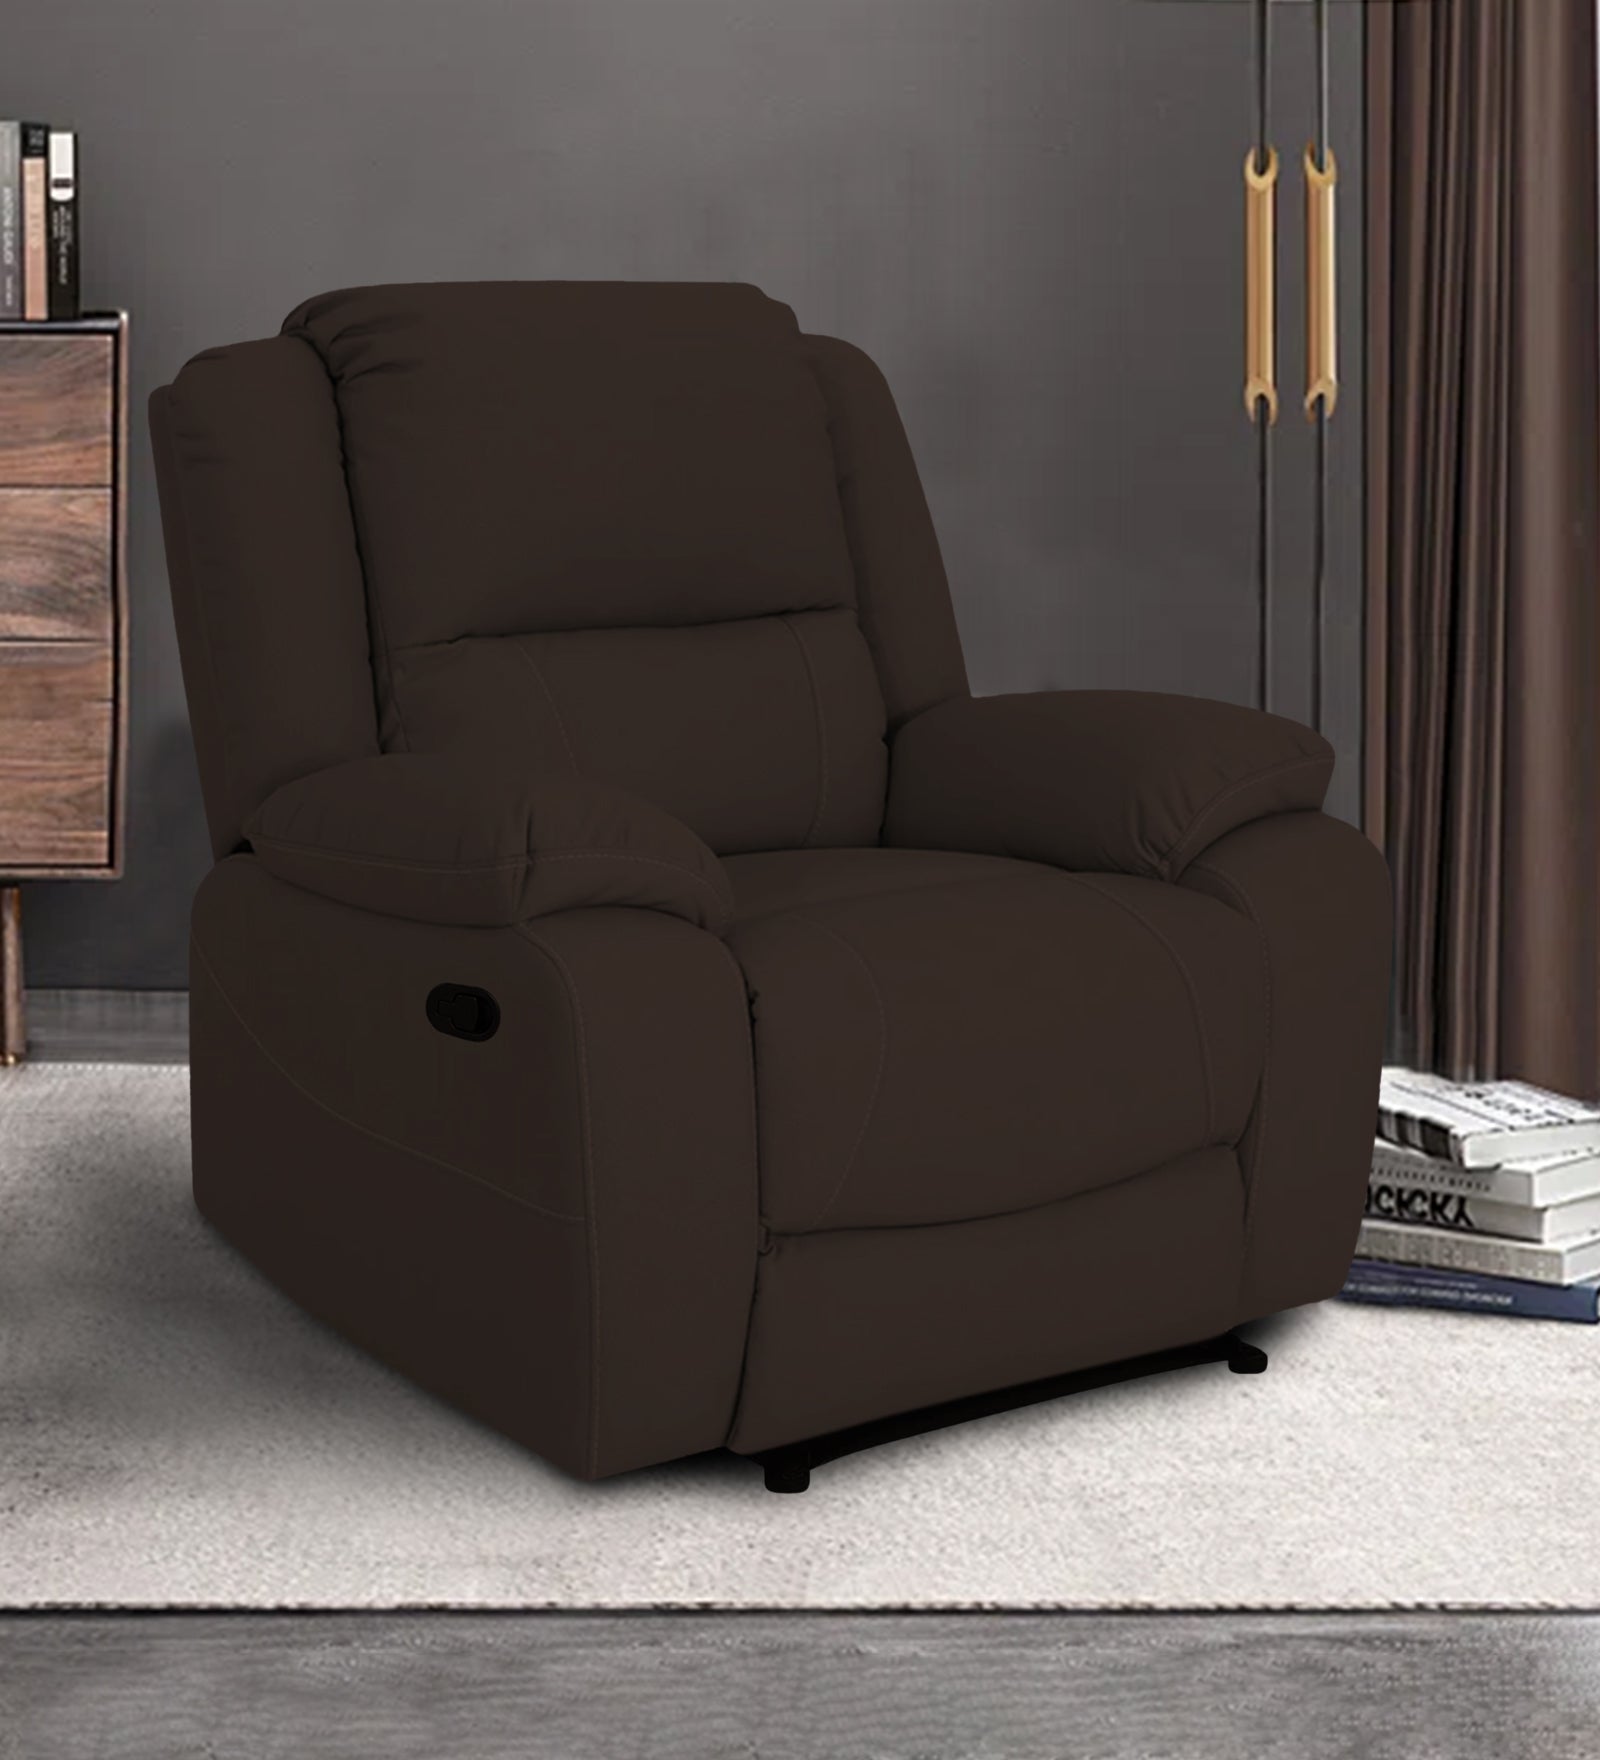 Adley Fabric Manual 1 Seater Recliner In Coco Brown Colour